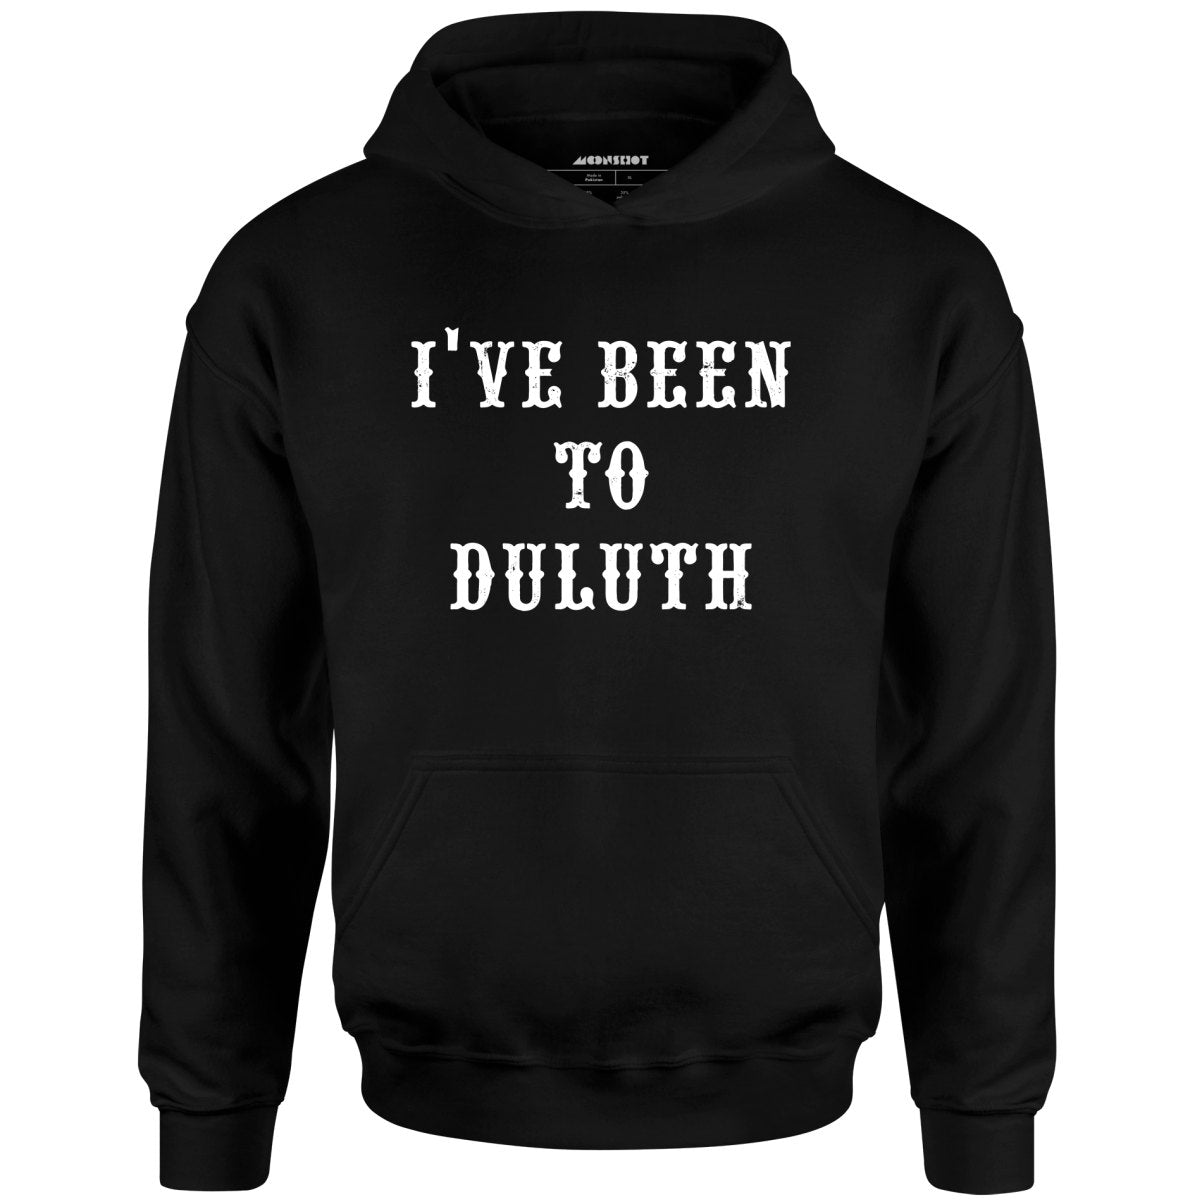 I've Been to Duluth - Unisex Hoodie